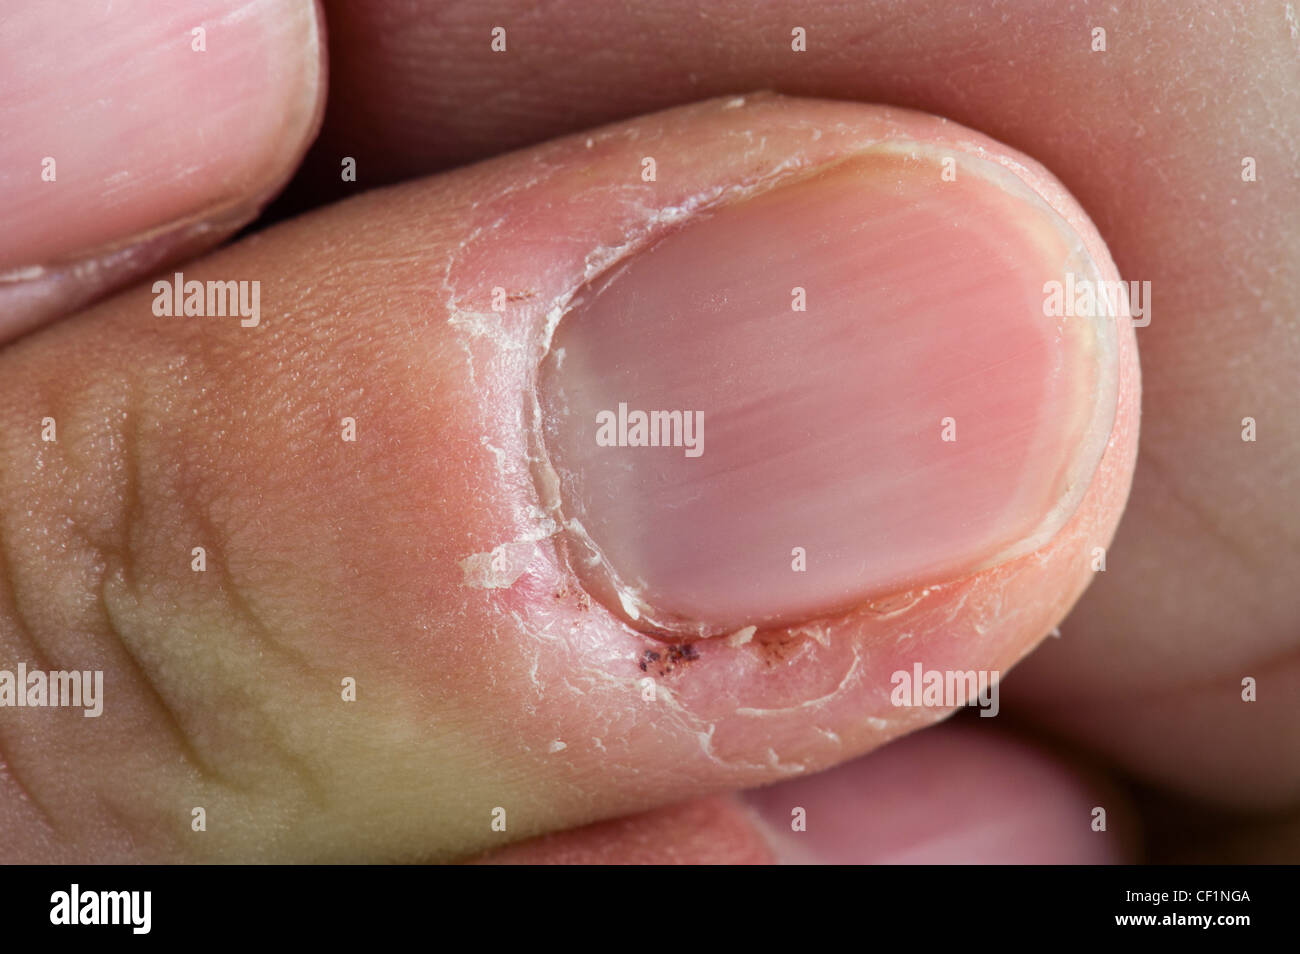 Homoeopathic management of nail disorders